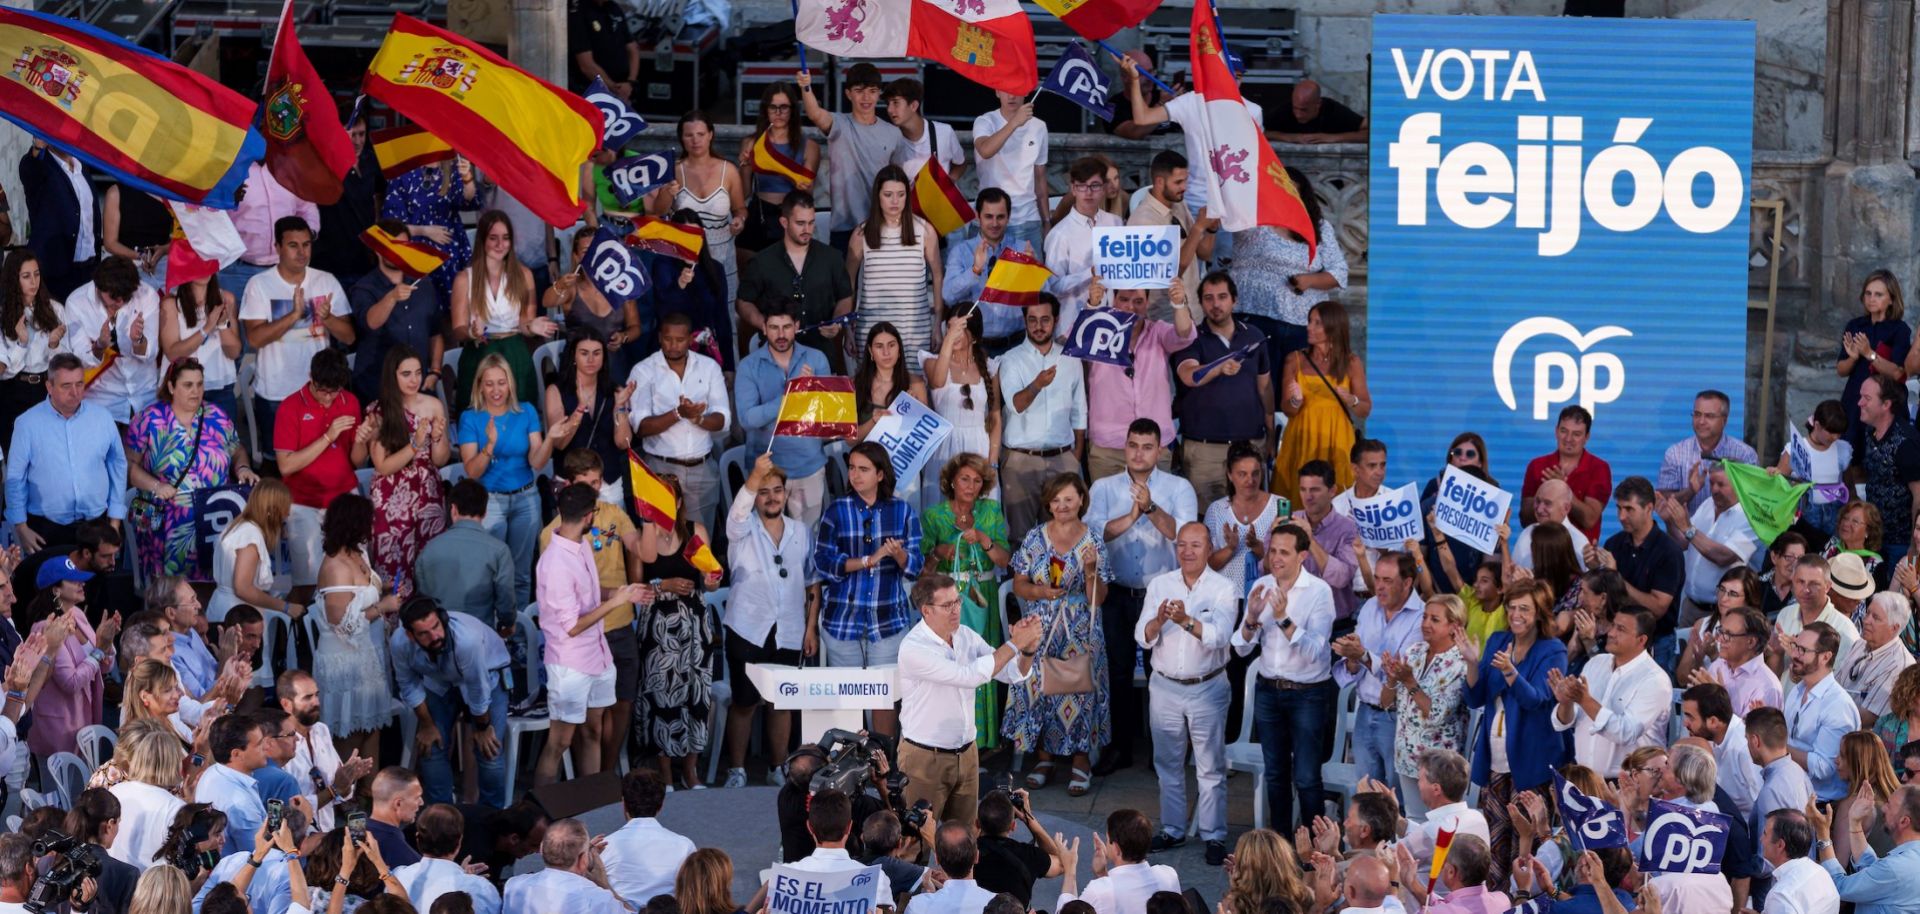 Alberto Nunez Feijoo (center, white shirt), the leader of Spain's right-wing People's Party, gestures to supporters at a campaign rally in Burgos, Spain, on July 13, 2023.